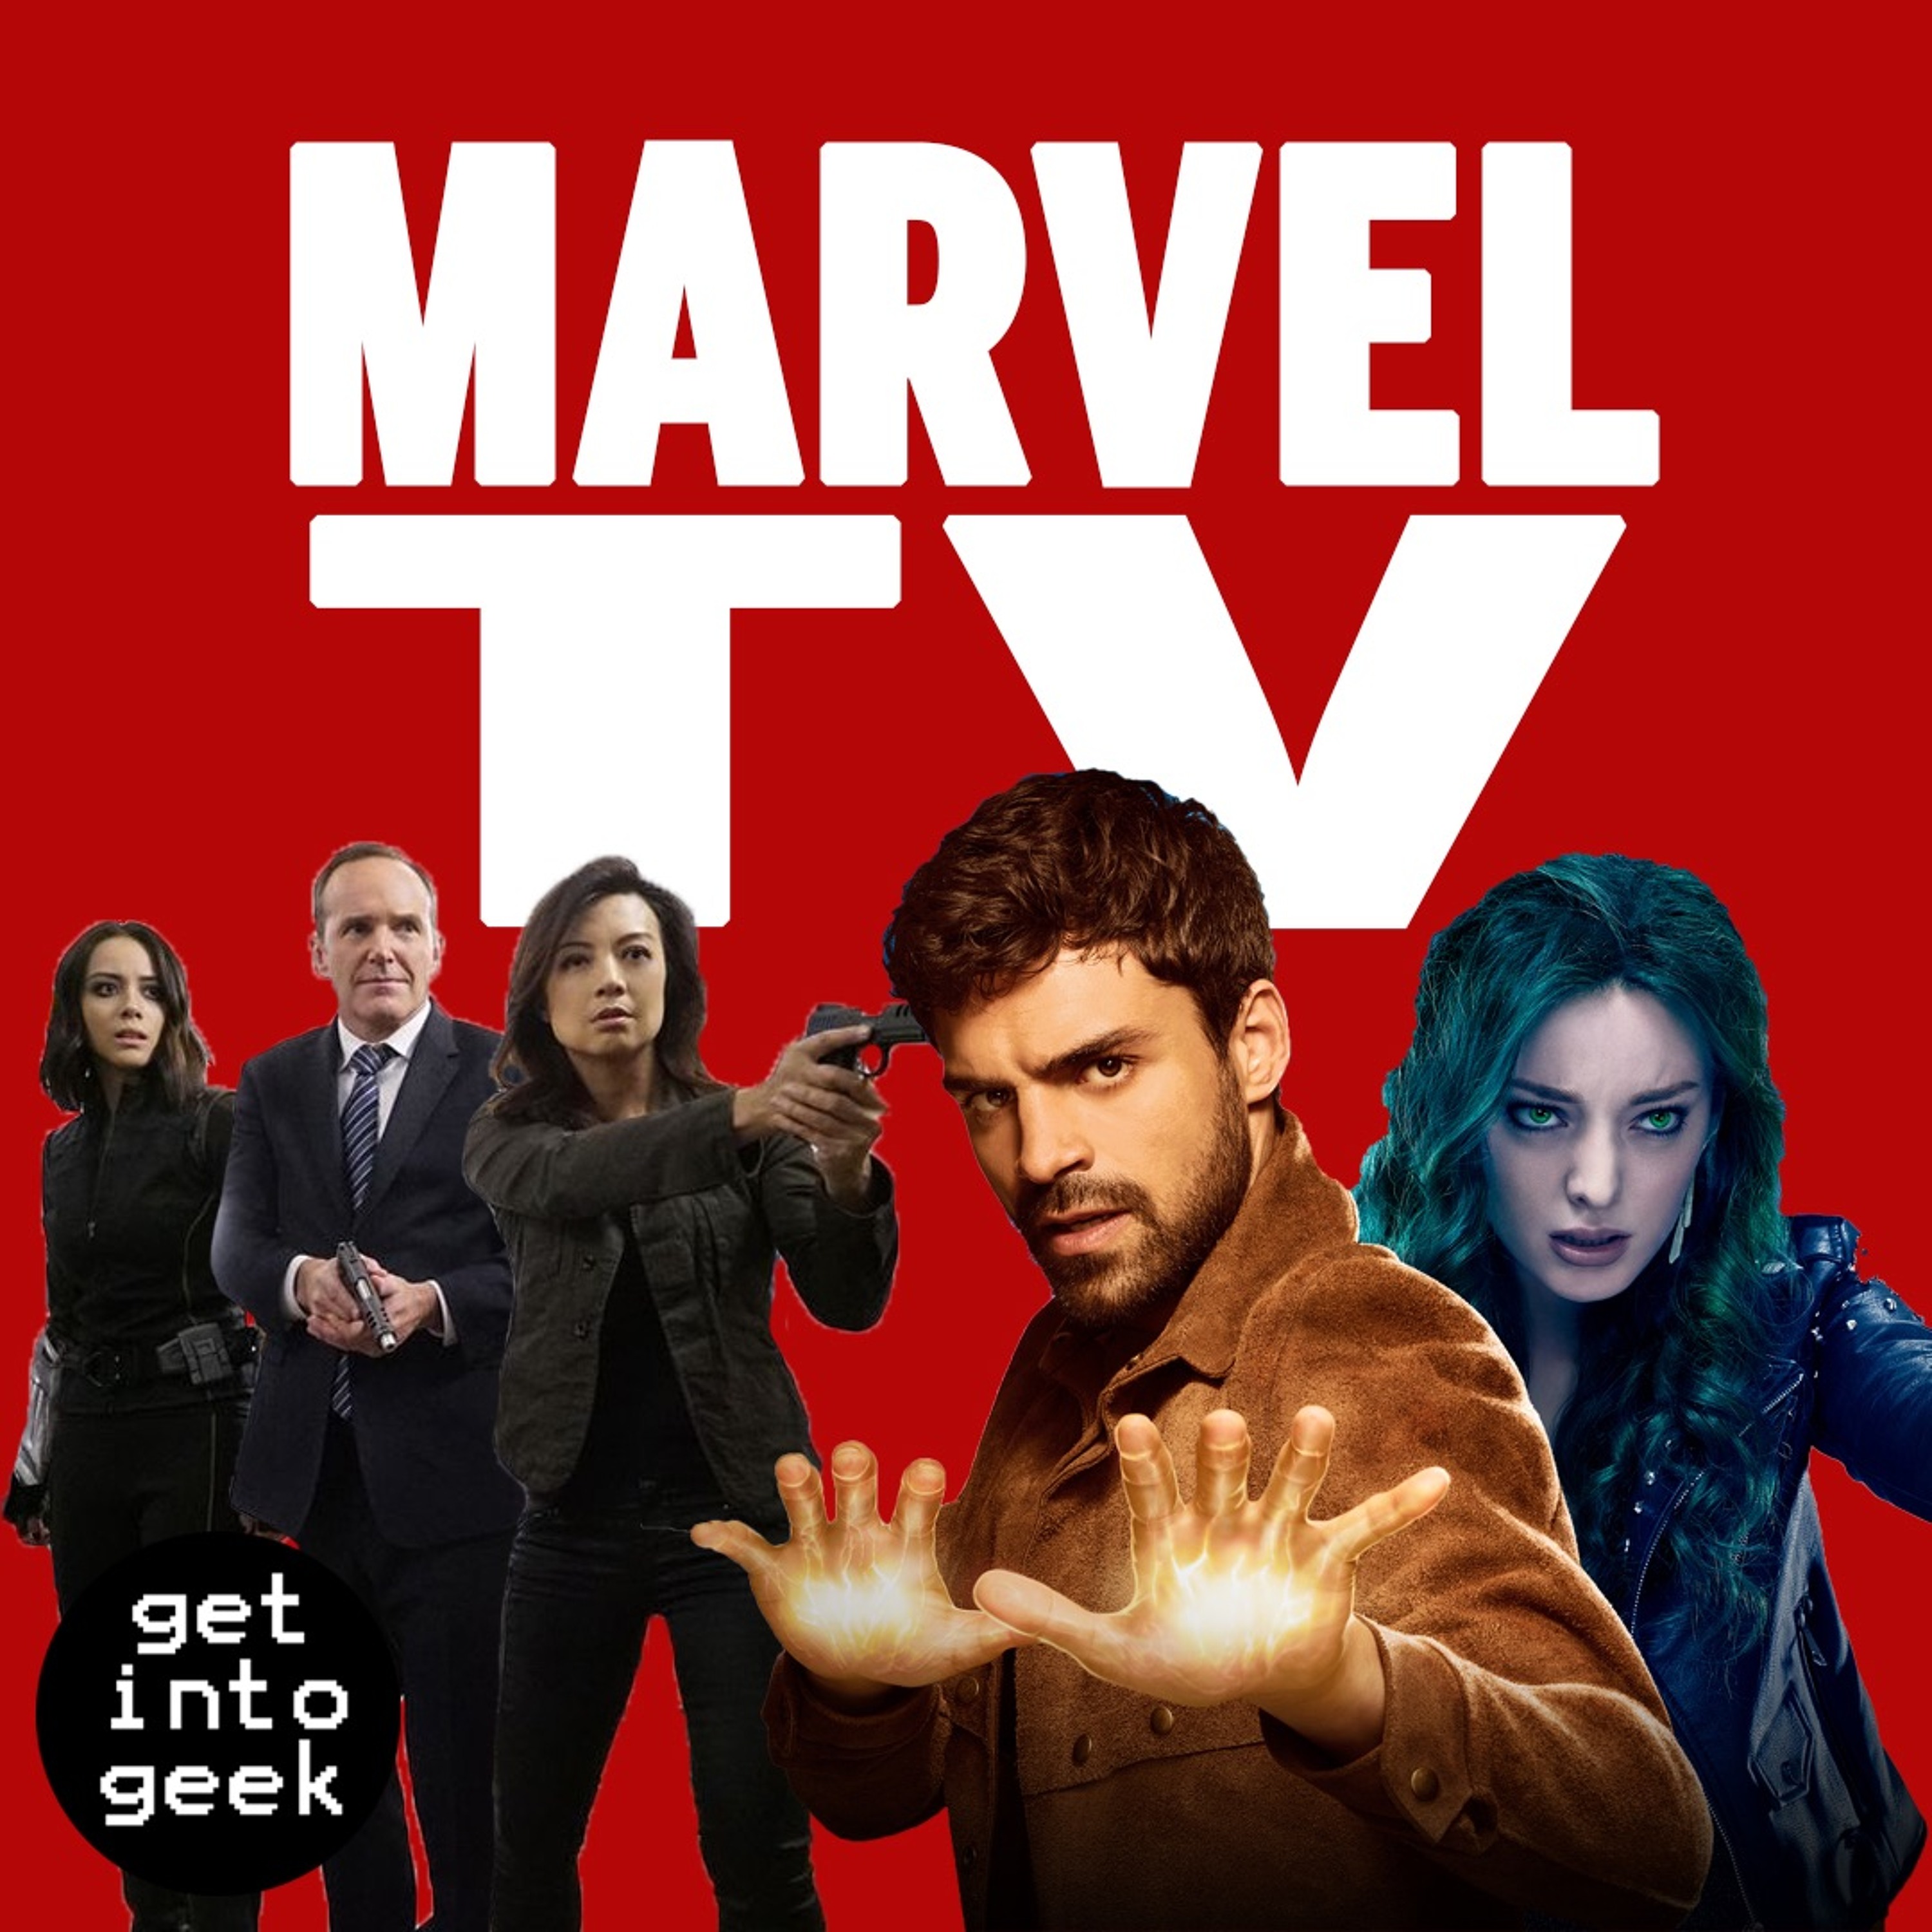 MARVEL TV: Episode 7 - S.H.I.E.L.D. 5.17 5.18 & The Gifted 2.01